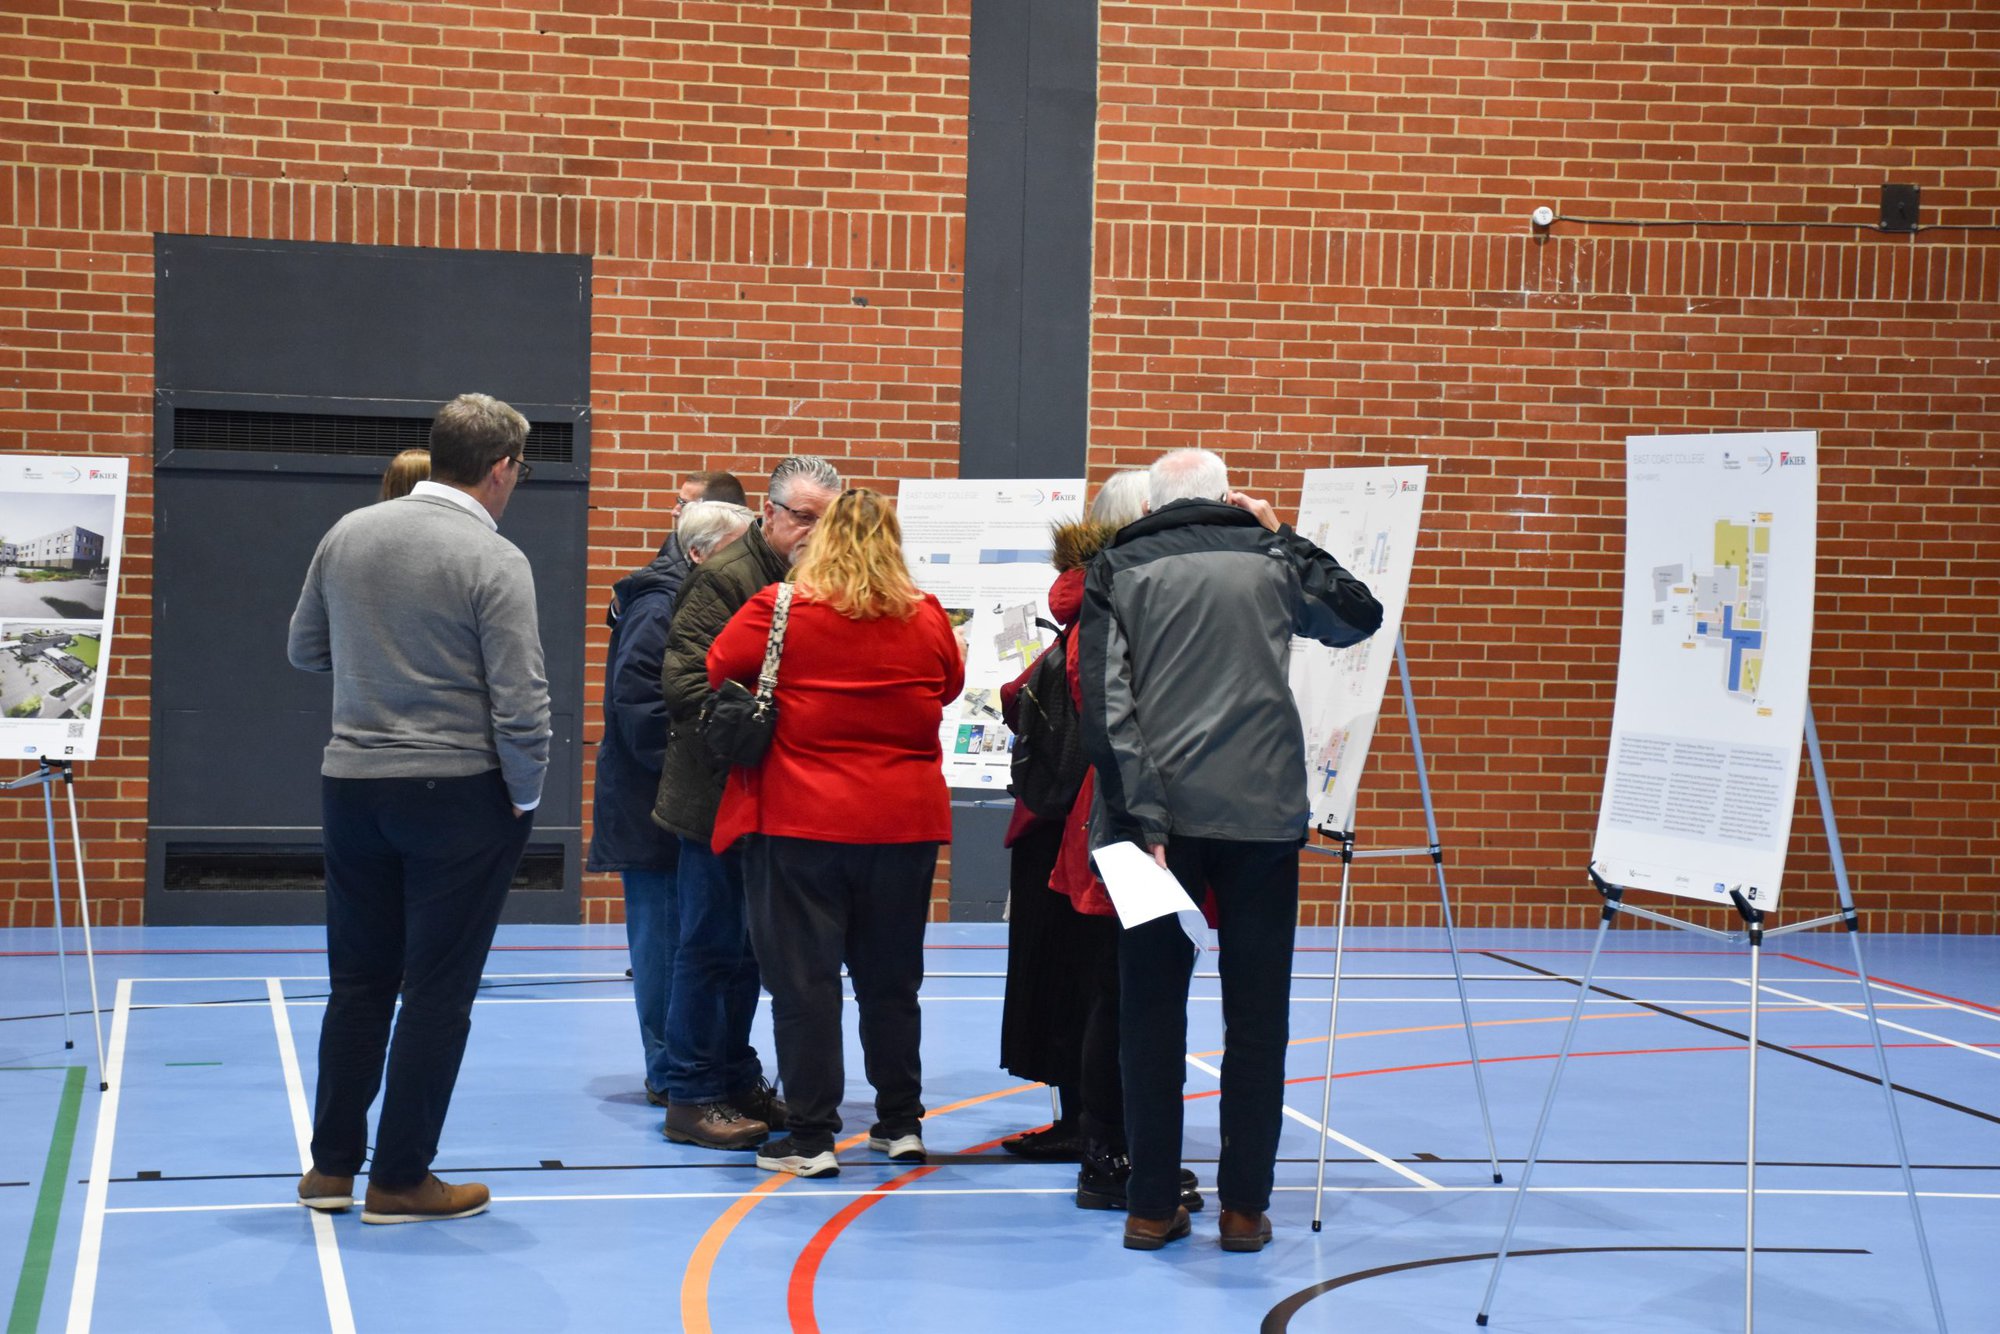 The public consultation on plans to redevelop East Coast College's Great Yarmouth campus.